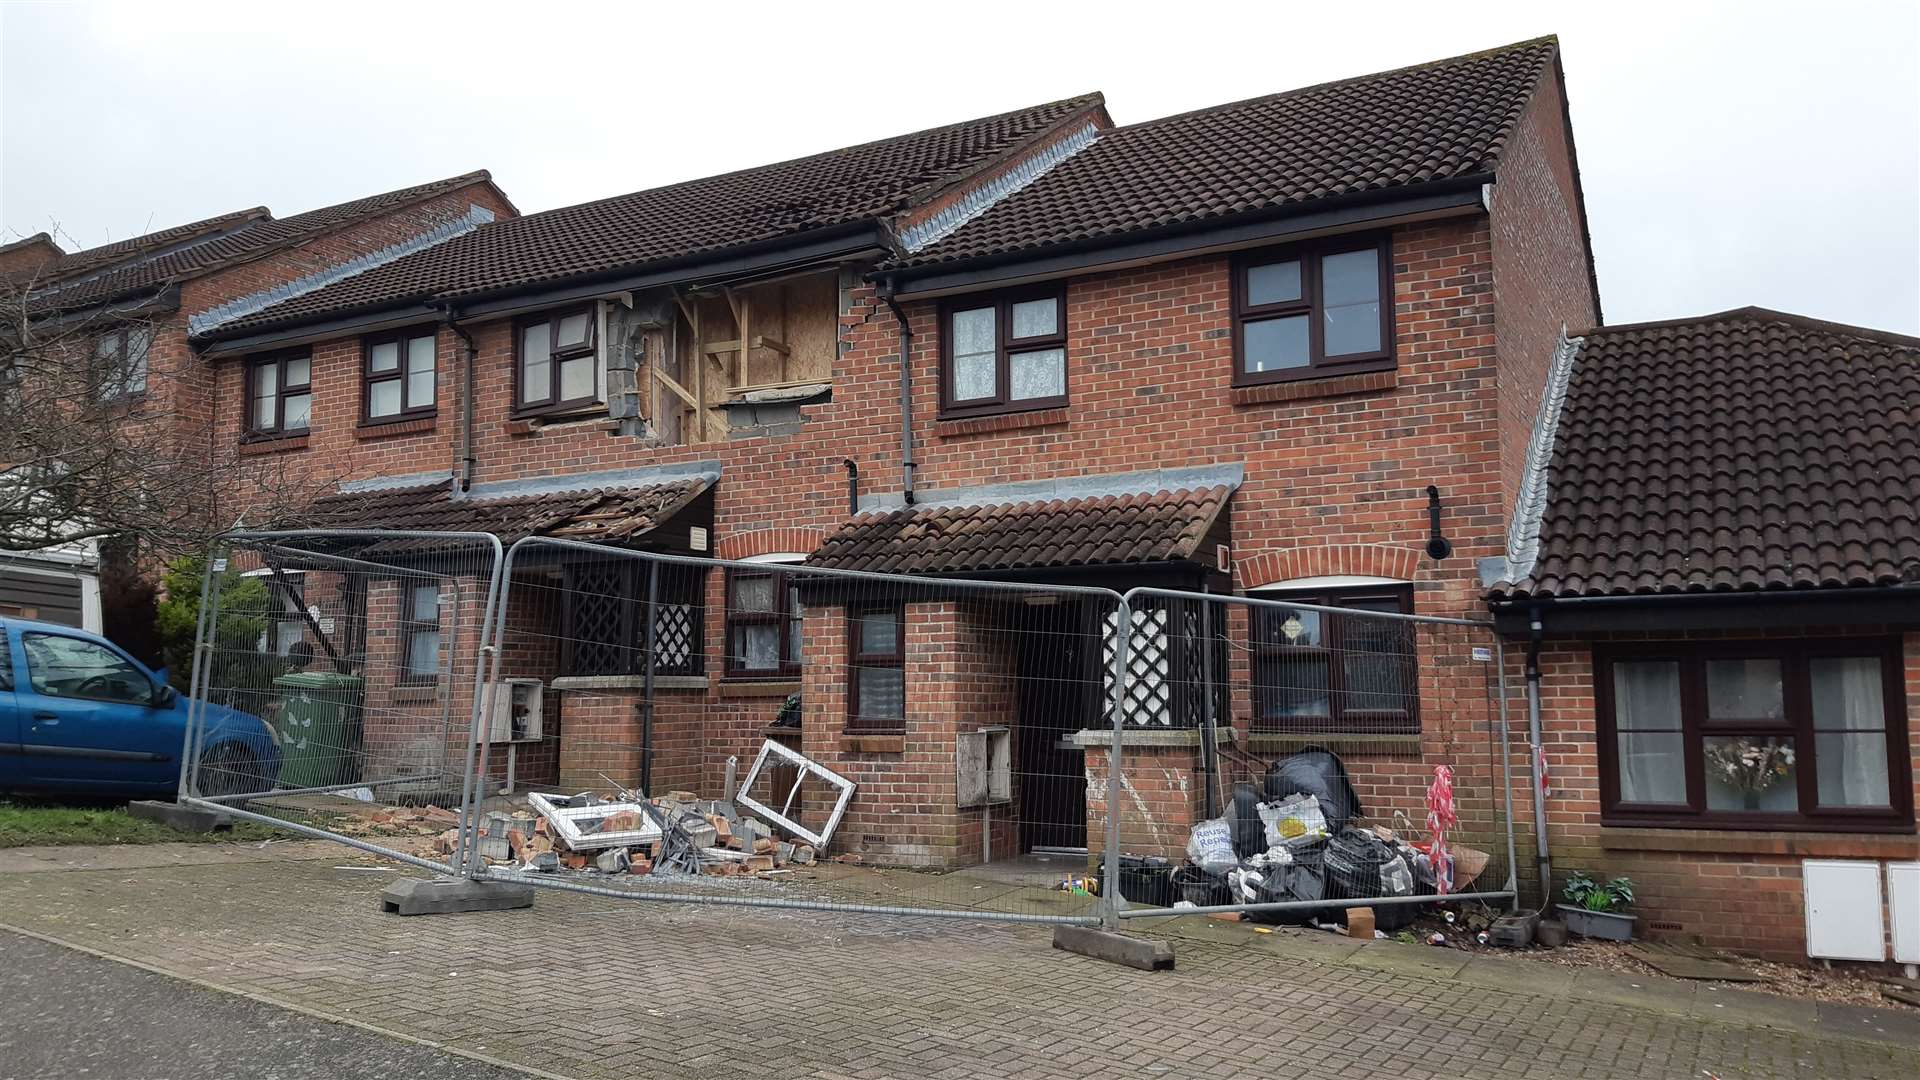 The aftermath of an explosion at a property in Smetham Gardens, Strood, on January 30